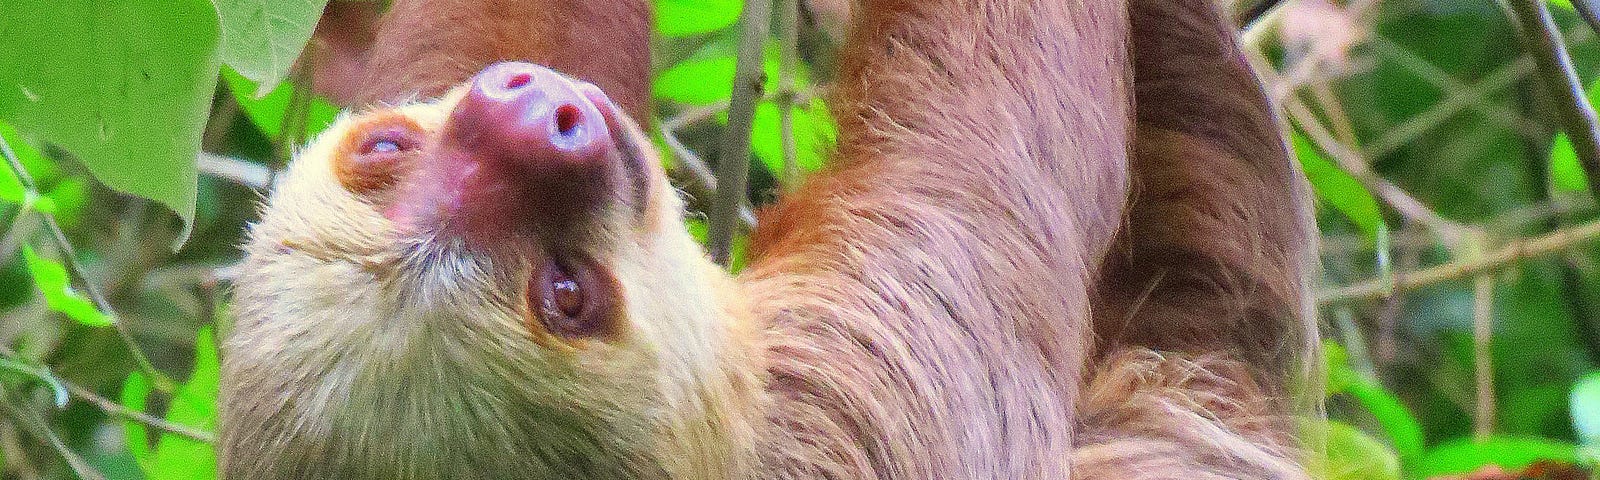 Sloth hanging upside down from a tree, life lessons you can learn from the sloth